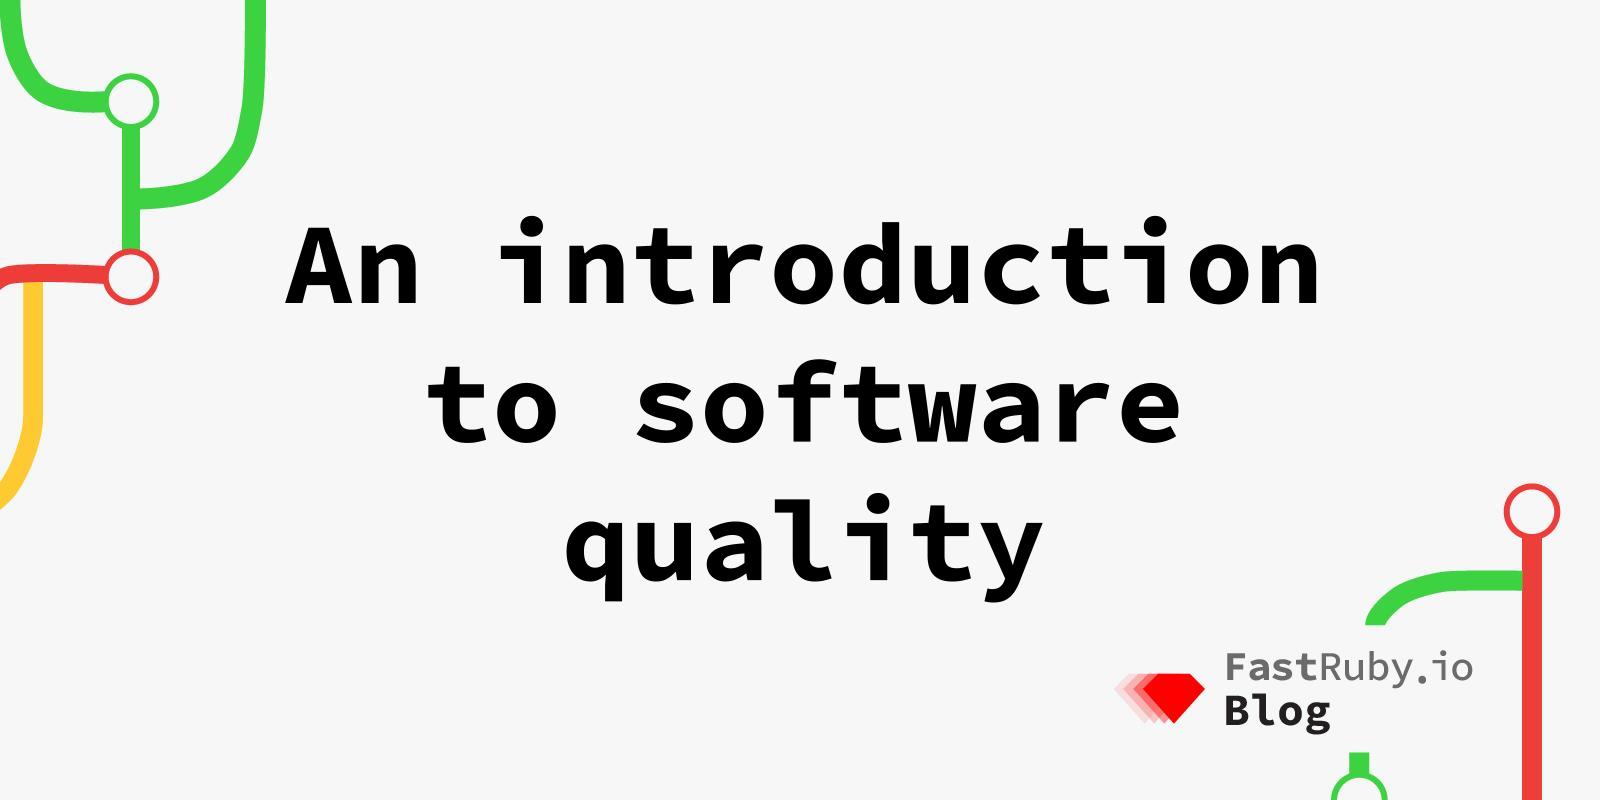 An introduction to software quality